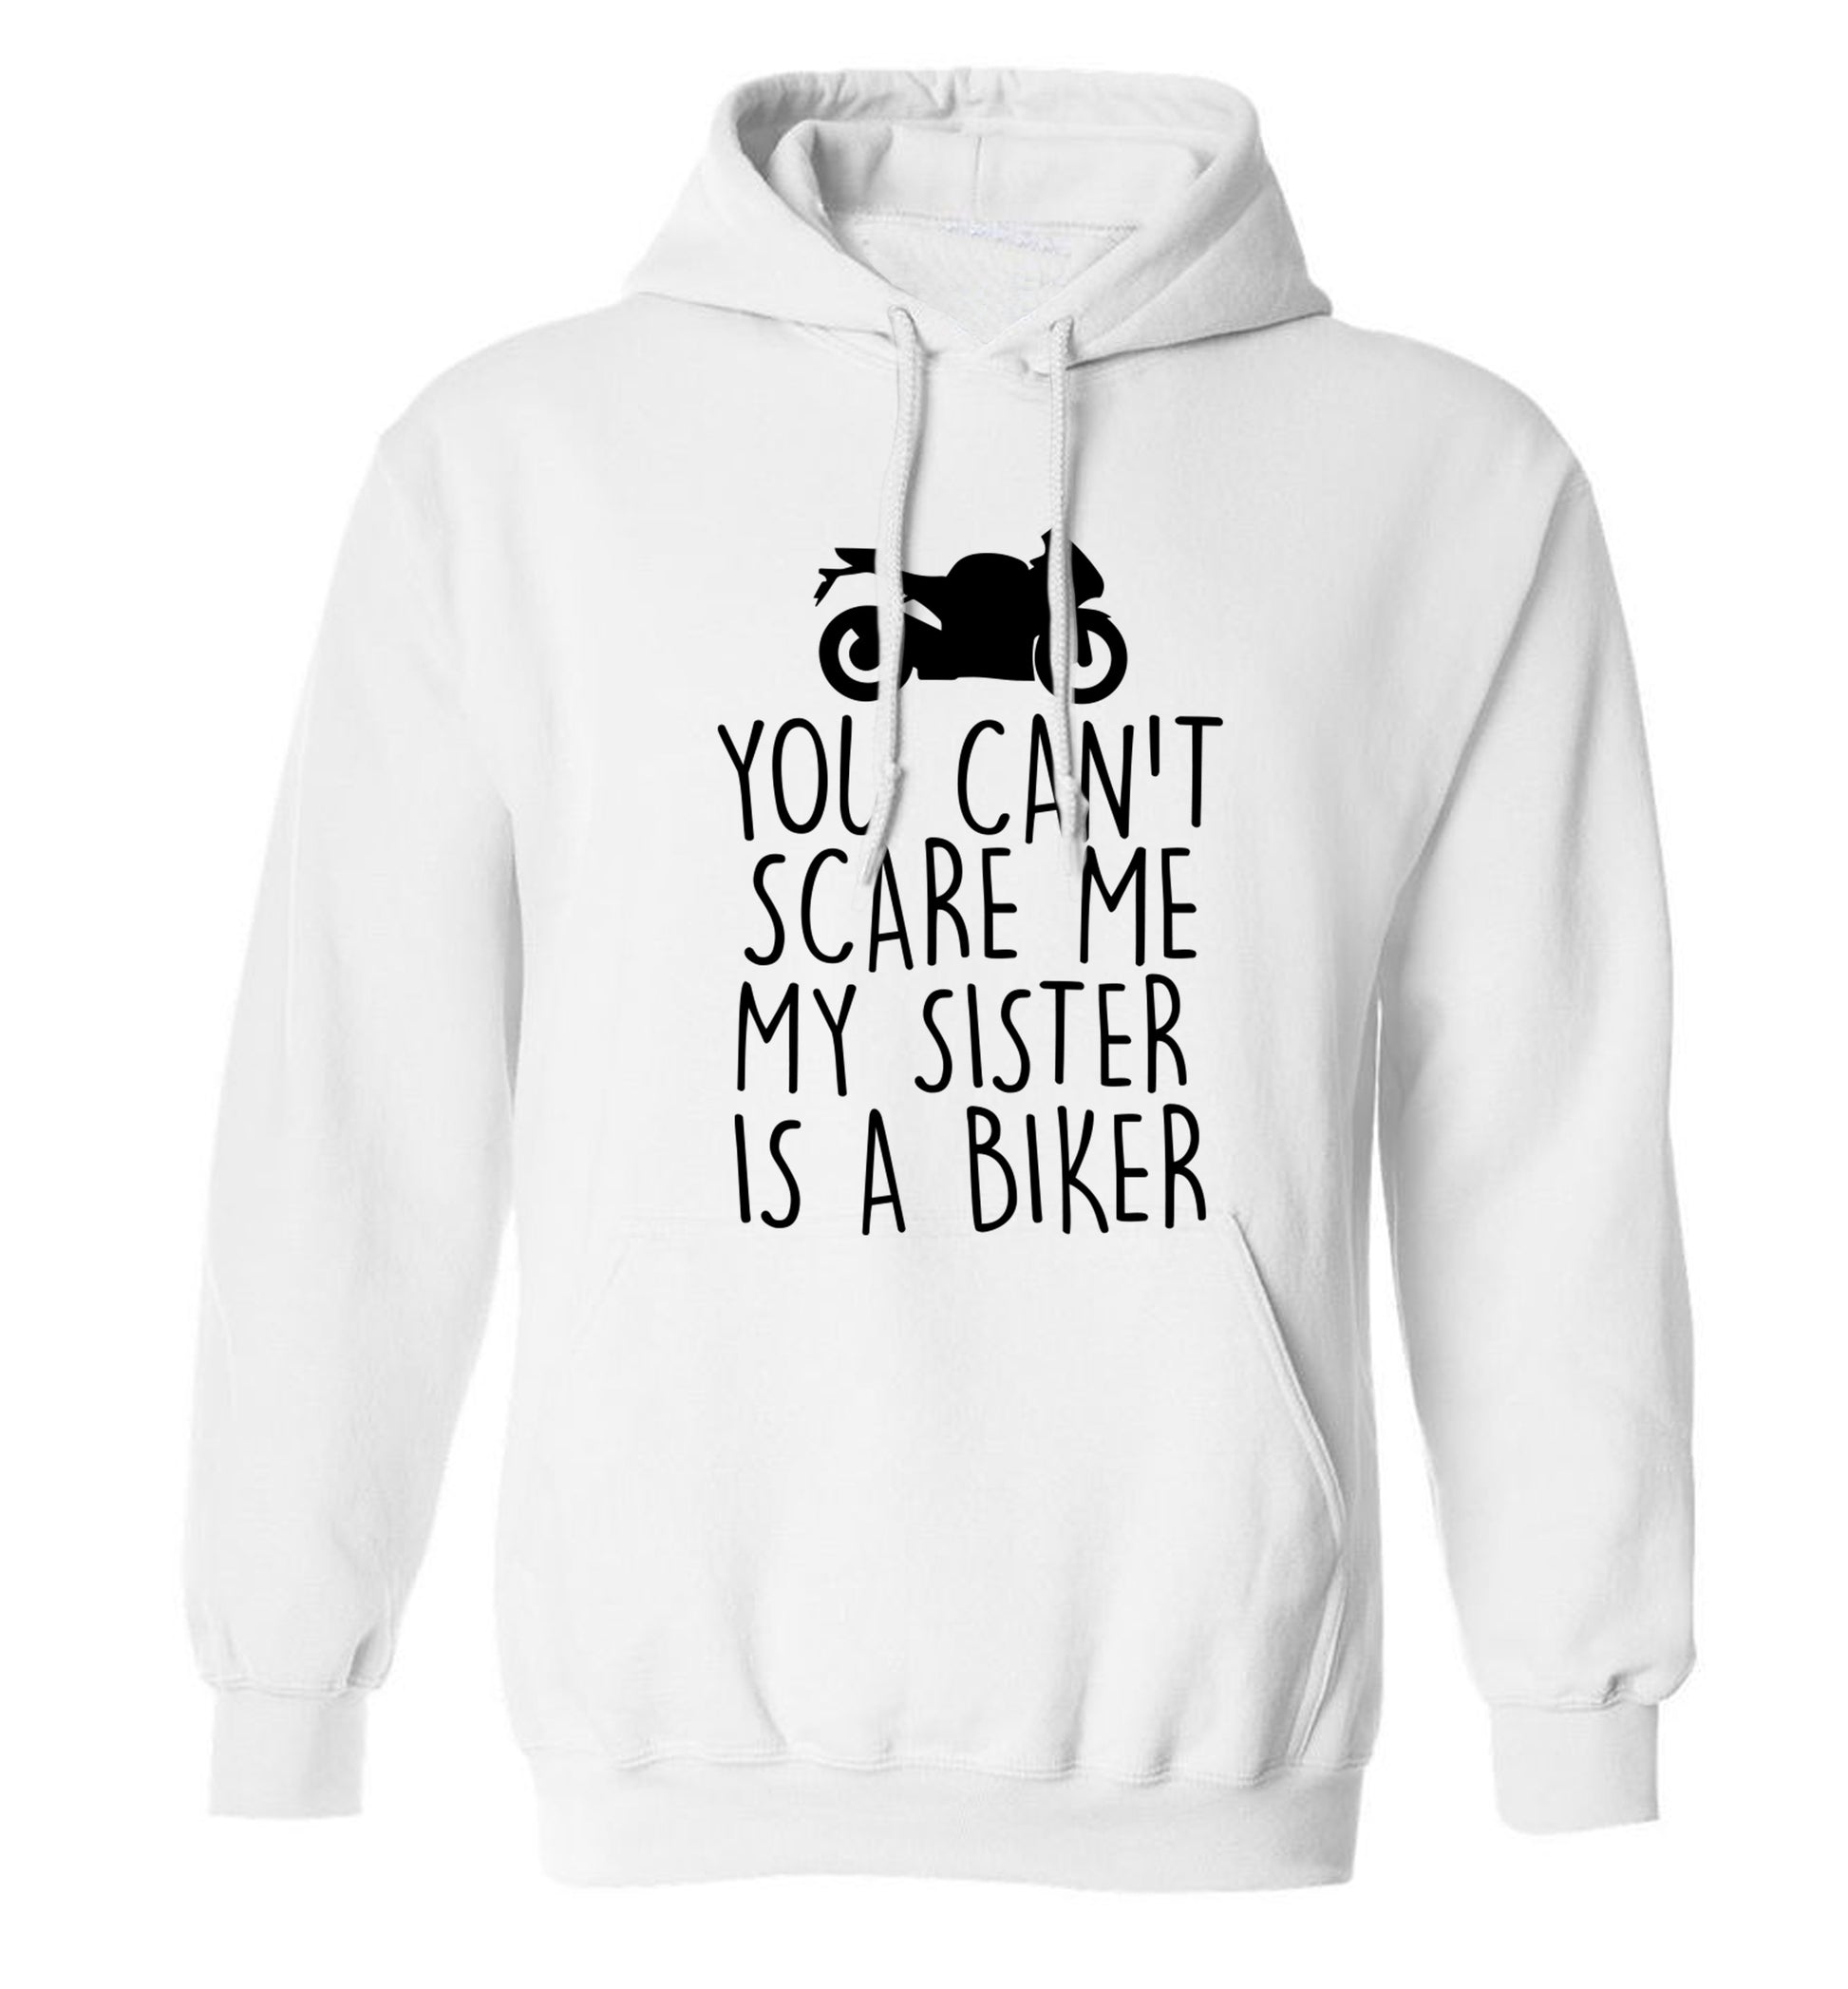 You can't scare me my sister is a biker adults unisex white hoodie 2XL